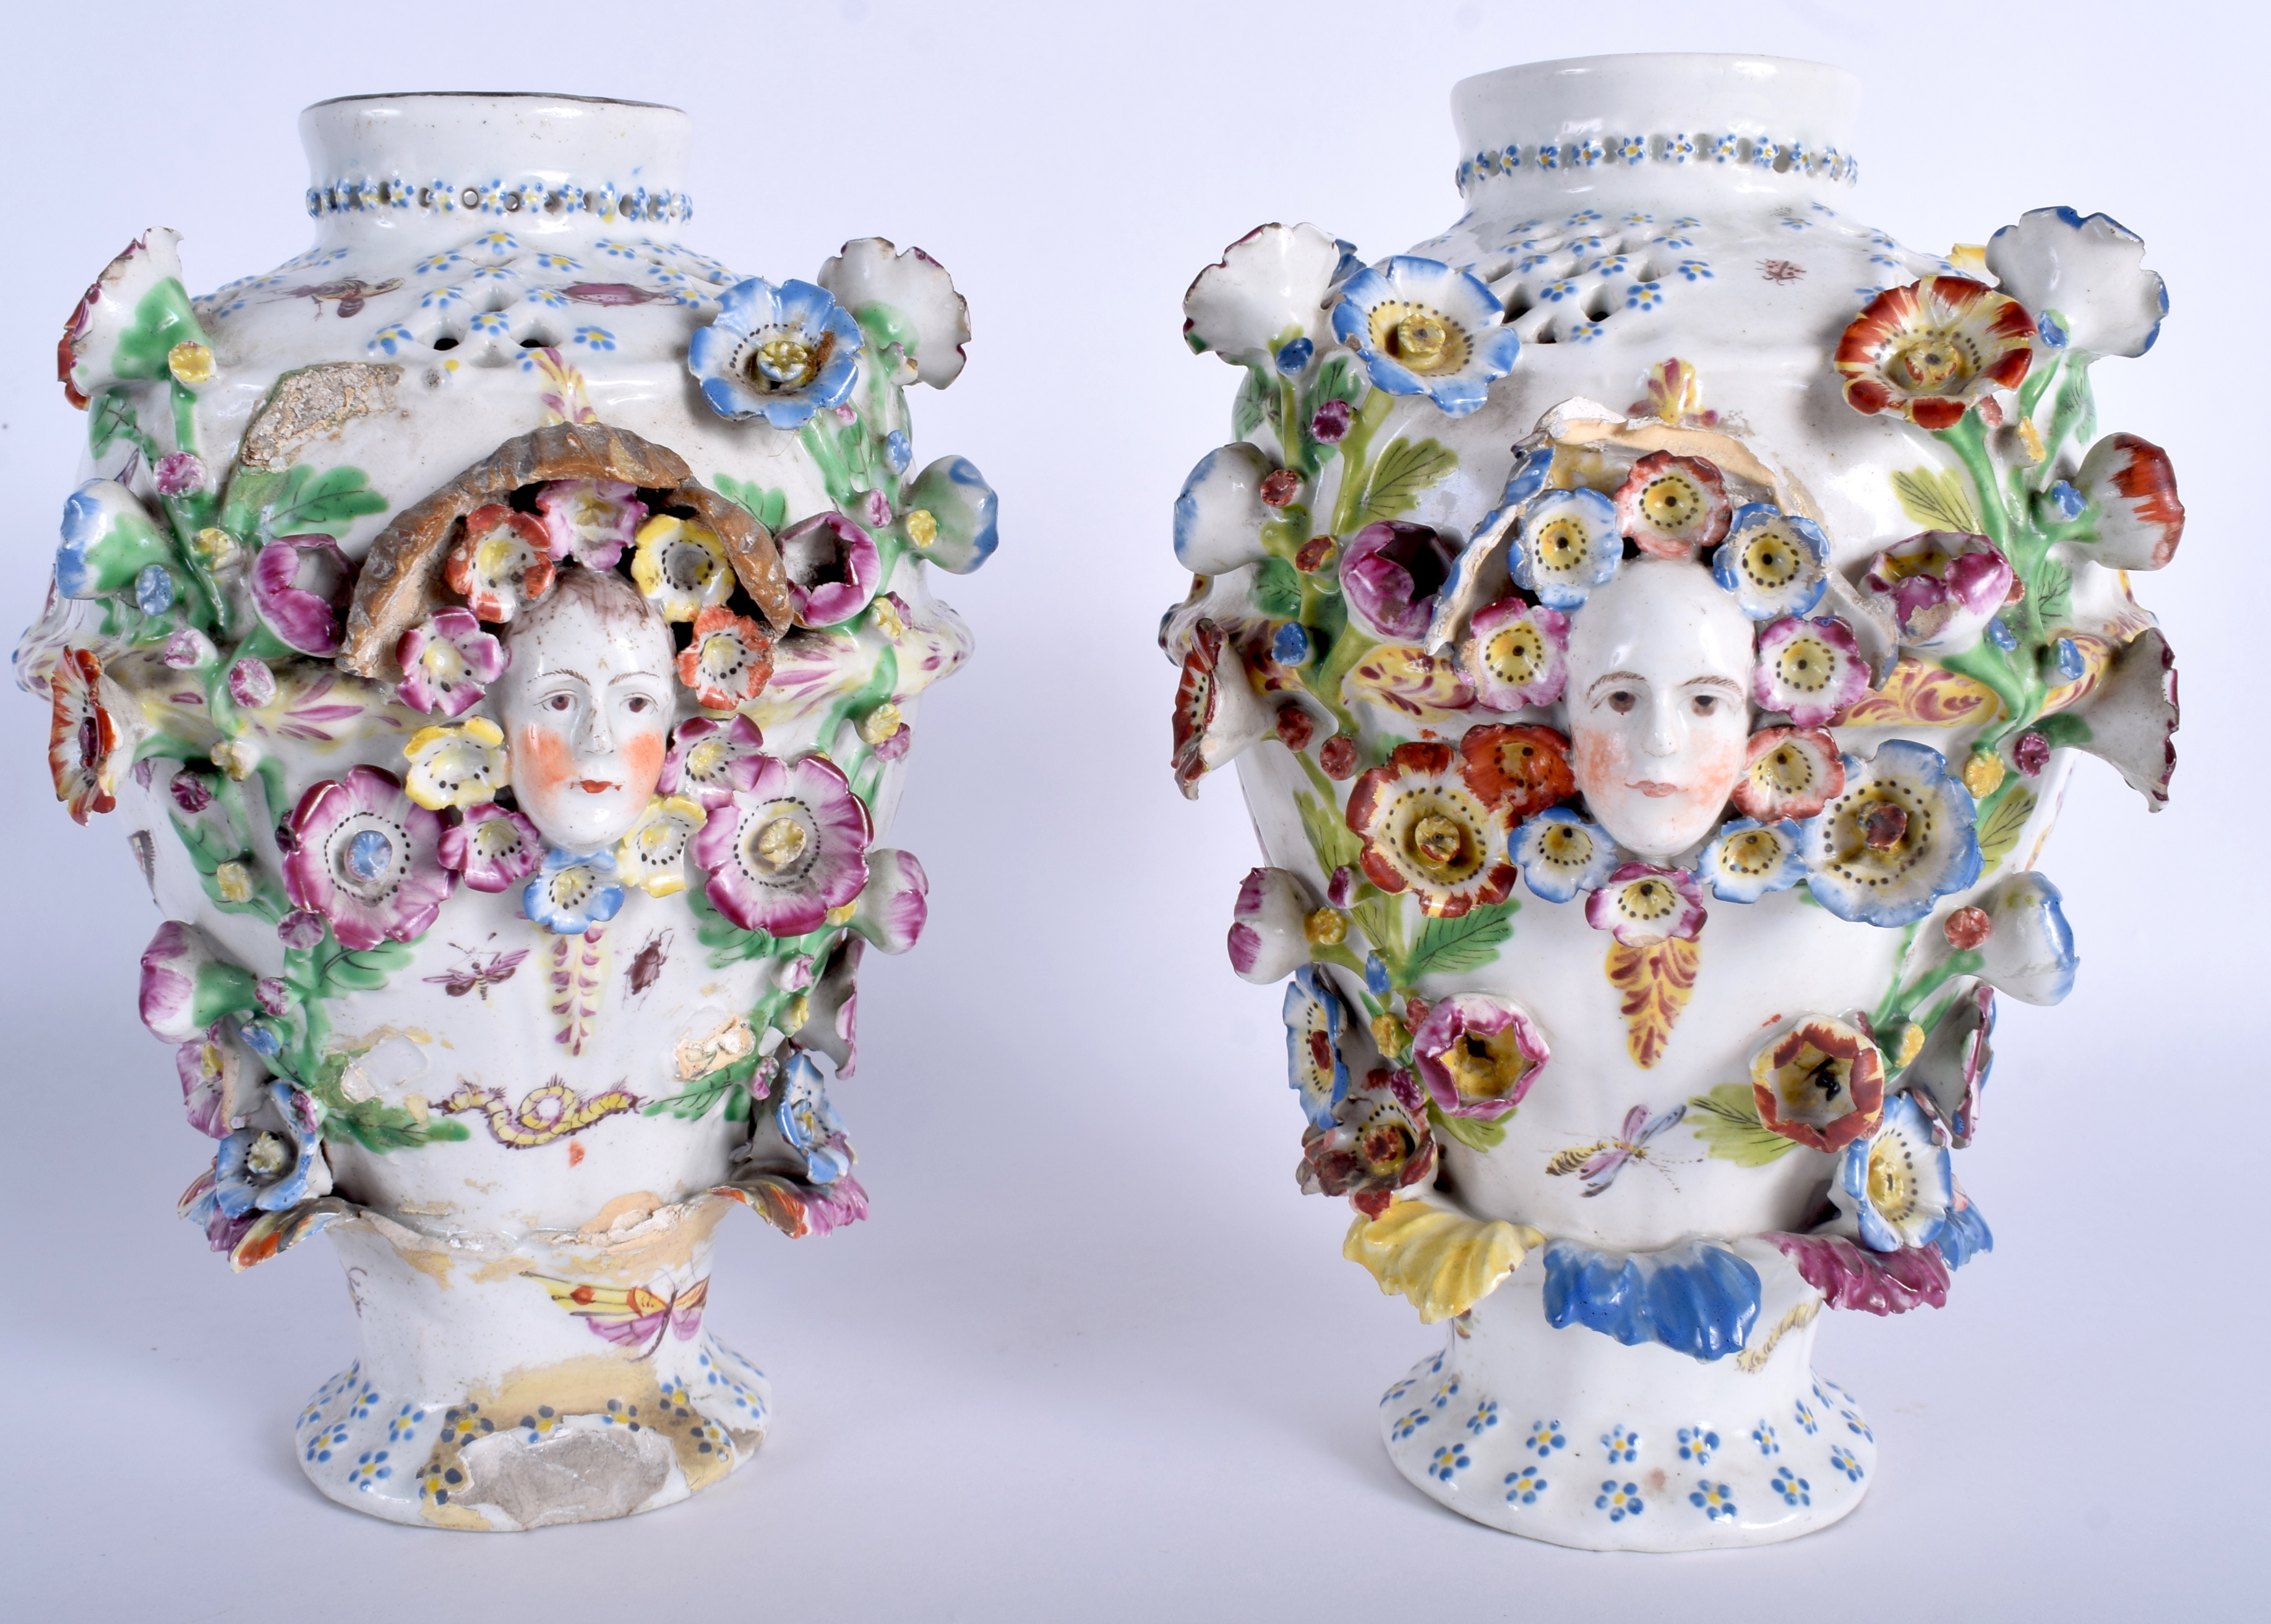 A PAIR OF 18TH CENTURY CHELSEA DERBY PORCELAIN VASES painted with flowers and mask heads. 21 cm hig - Image 2 of 4